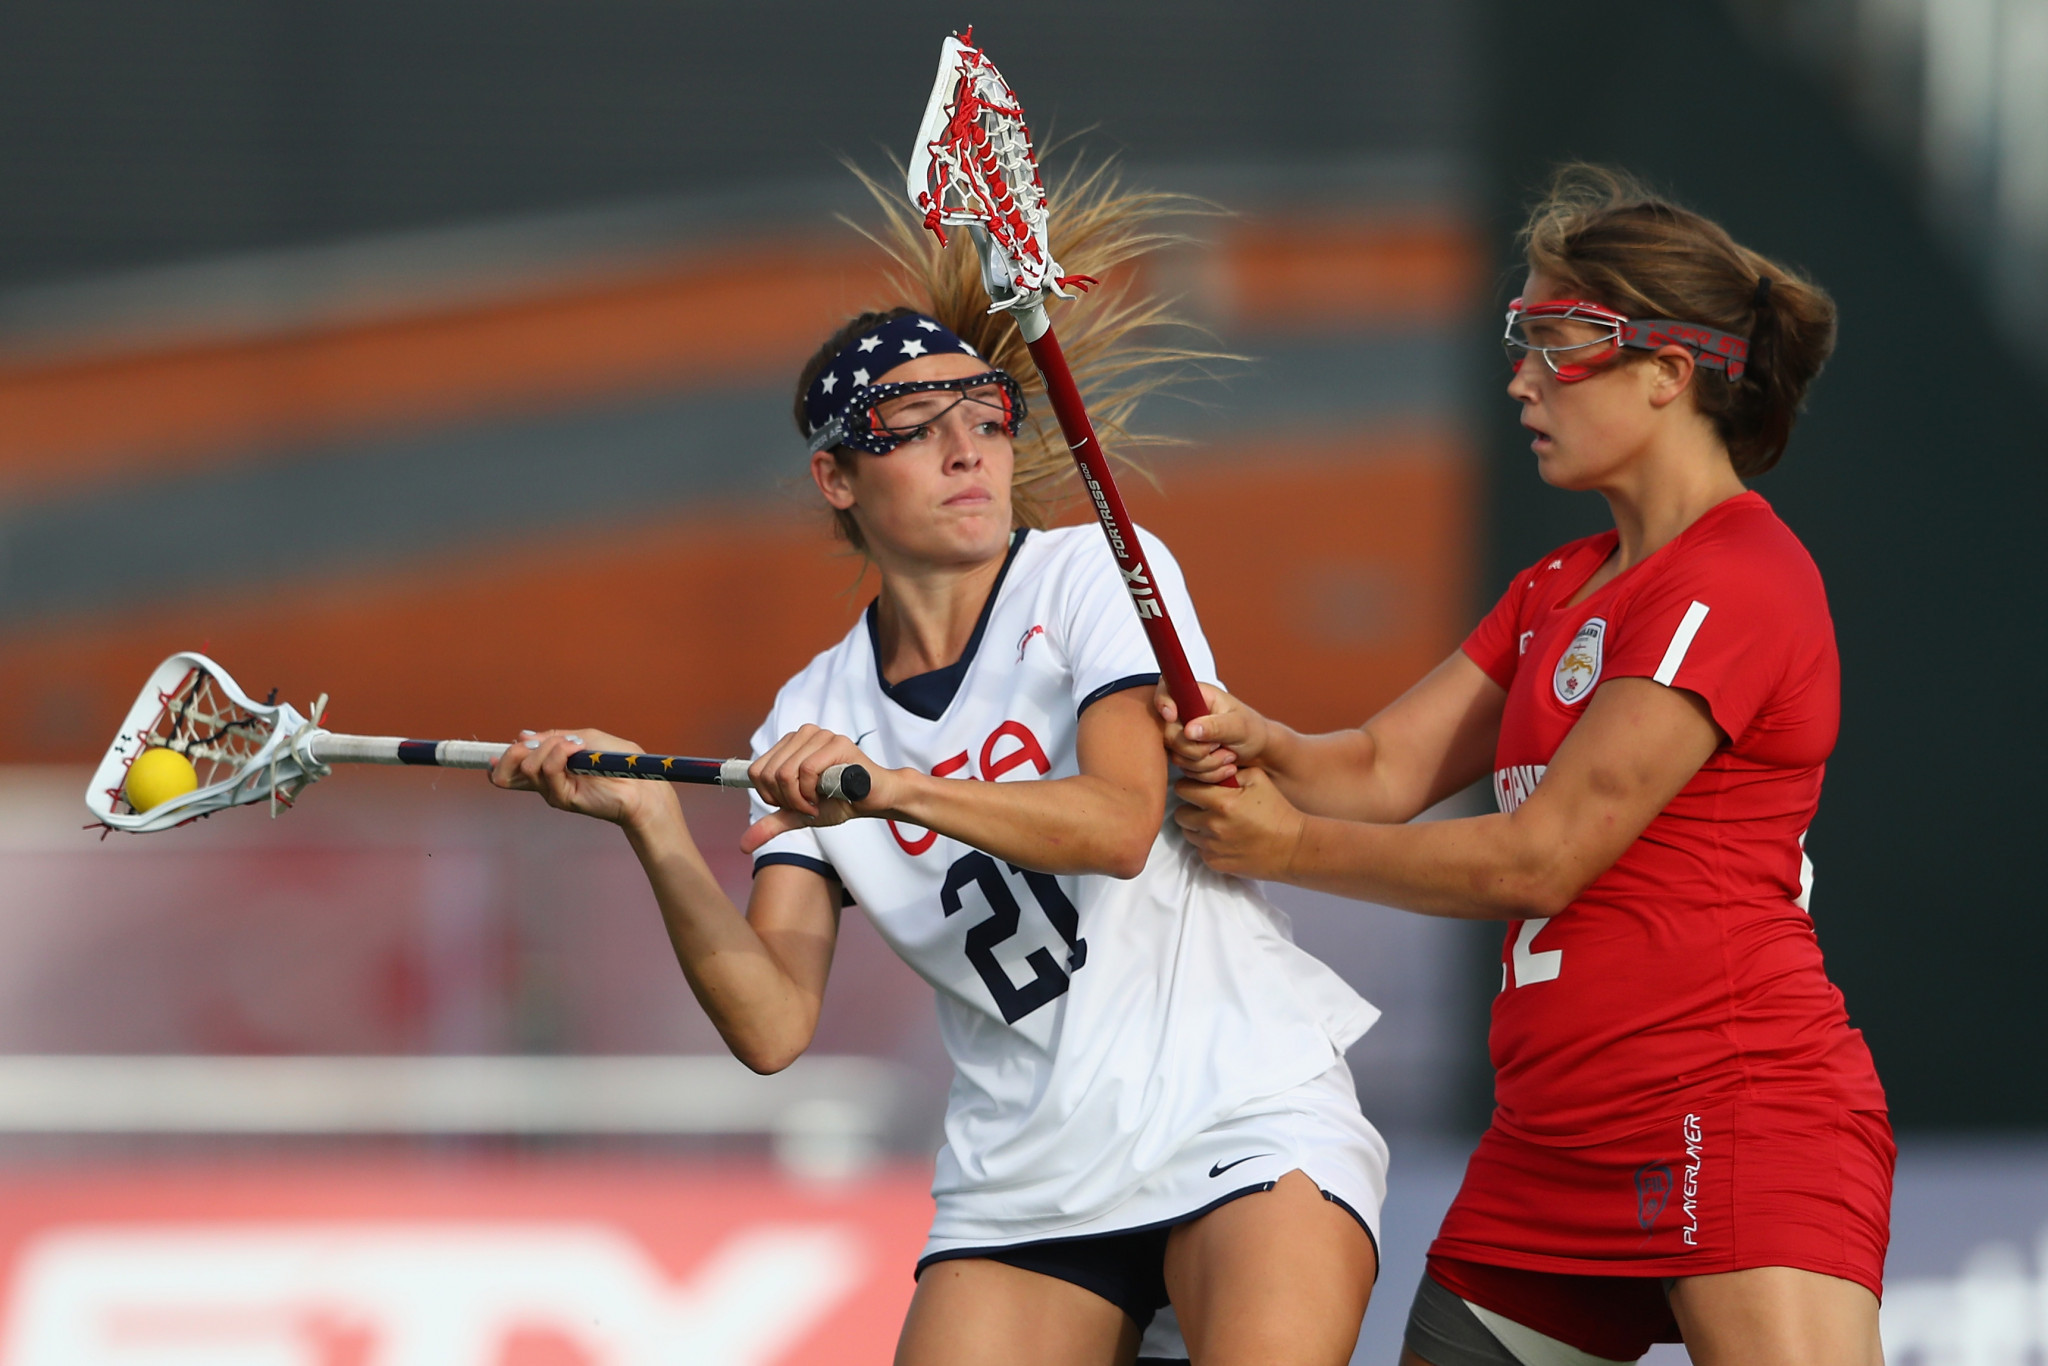 United States confirmed as top seed for 2022 Lacrosse Women's World Championship